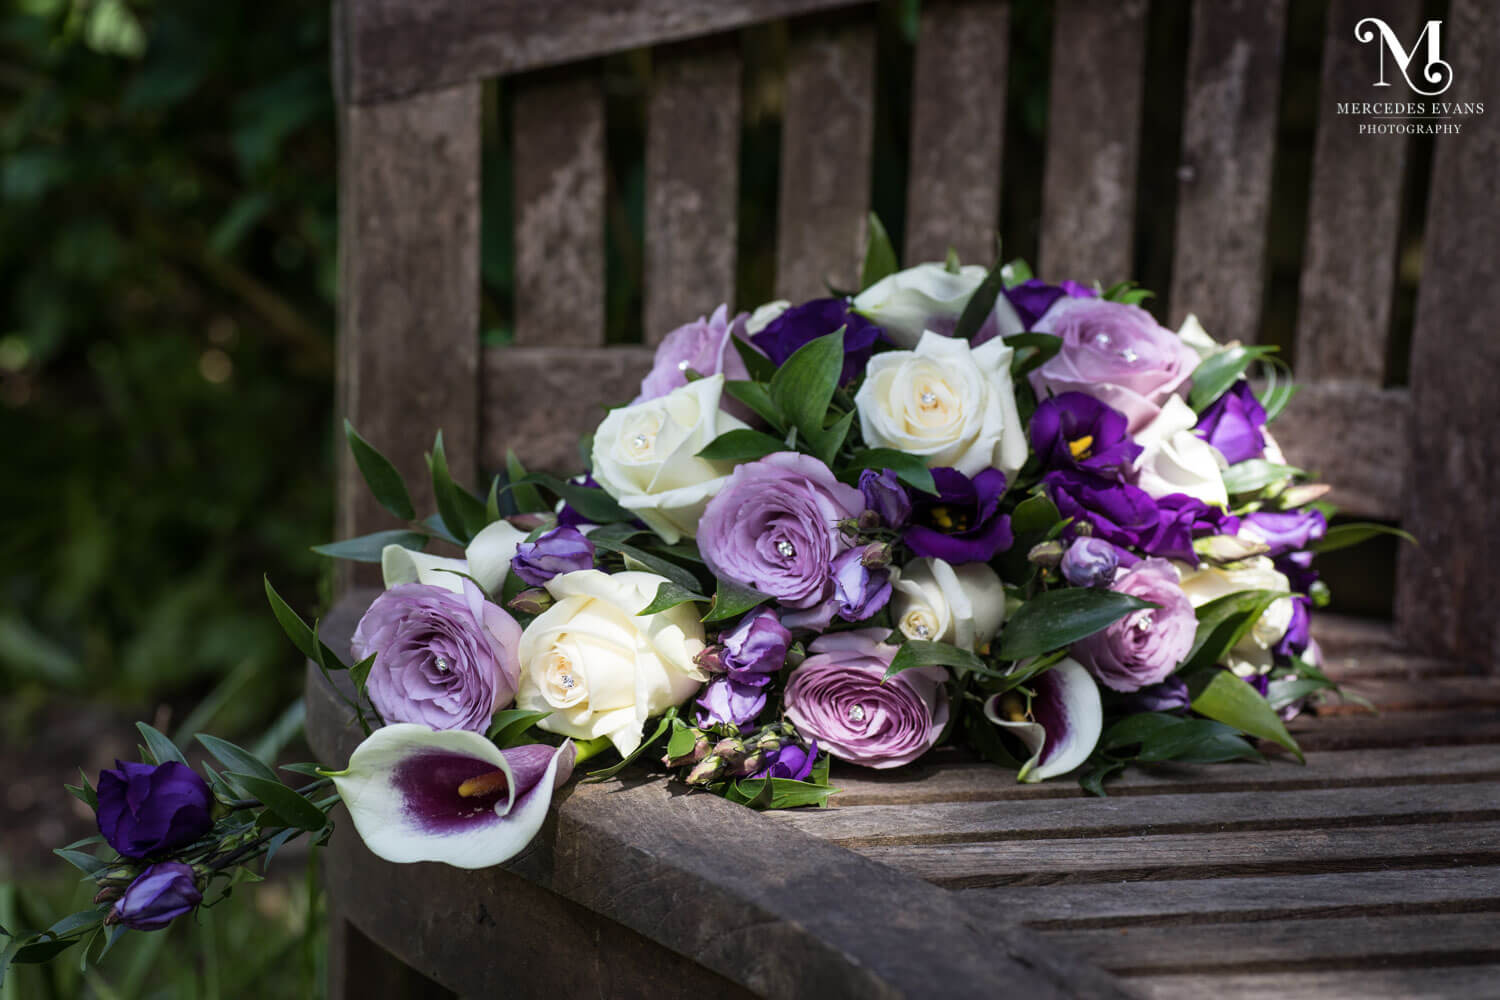 the bride's bouquet of pink and lilac roses lies on a garden bench in the sunlight